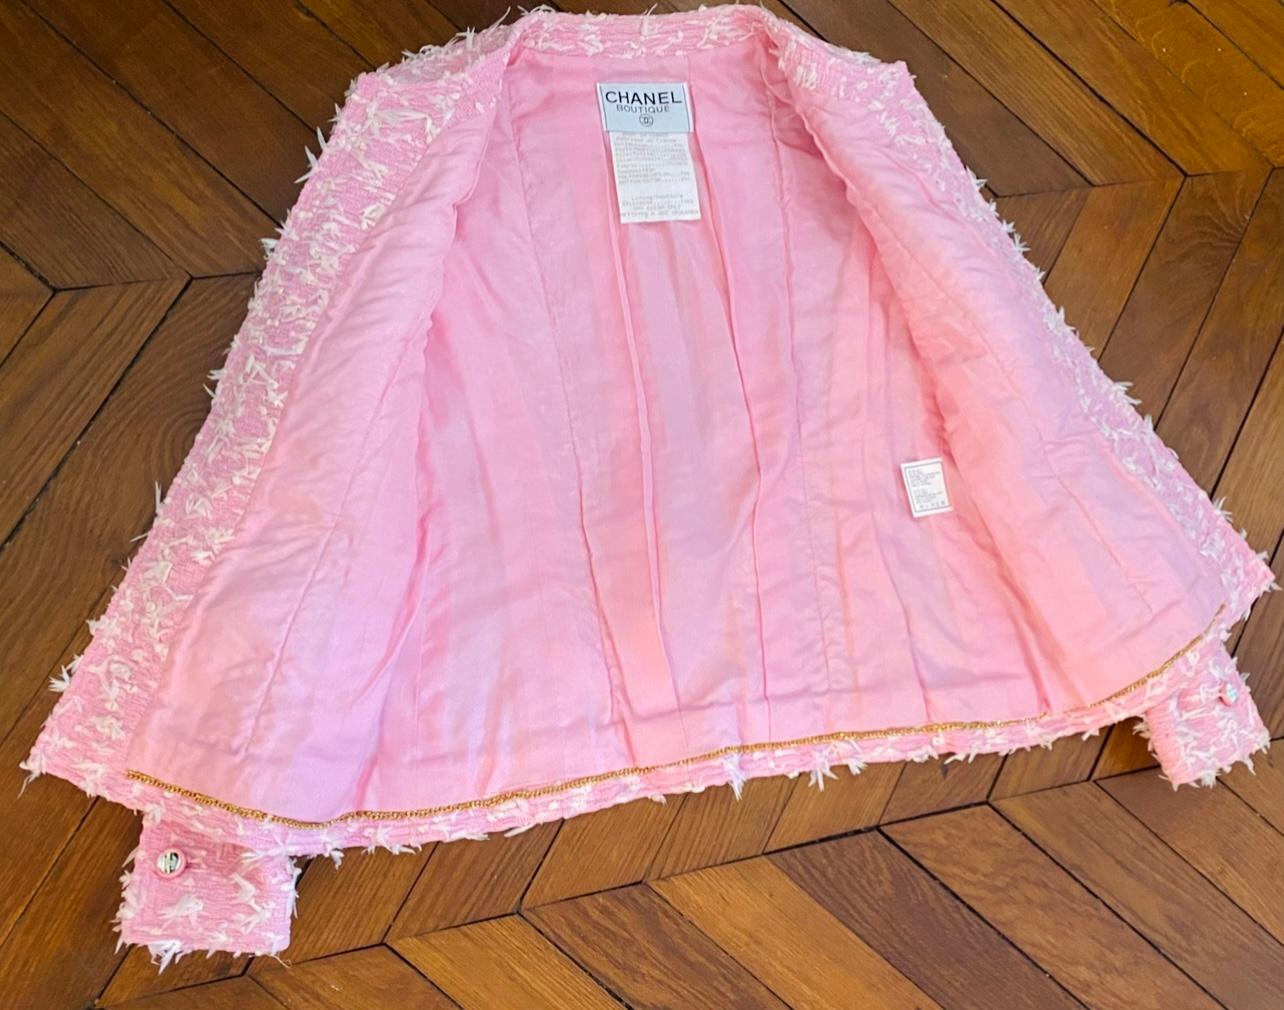 Rare Chanel Cruise 1995 pink boucle jacket  For Sale 2